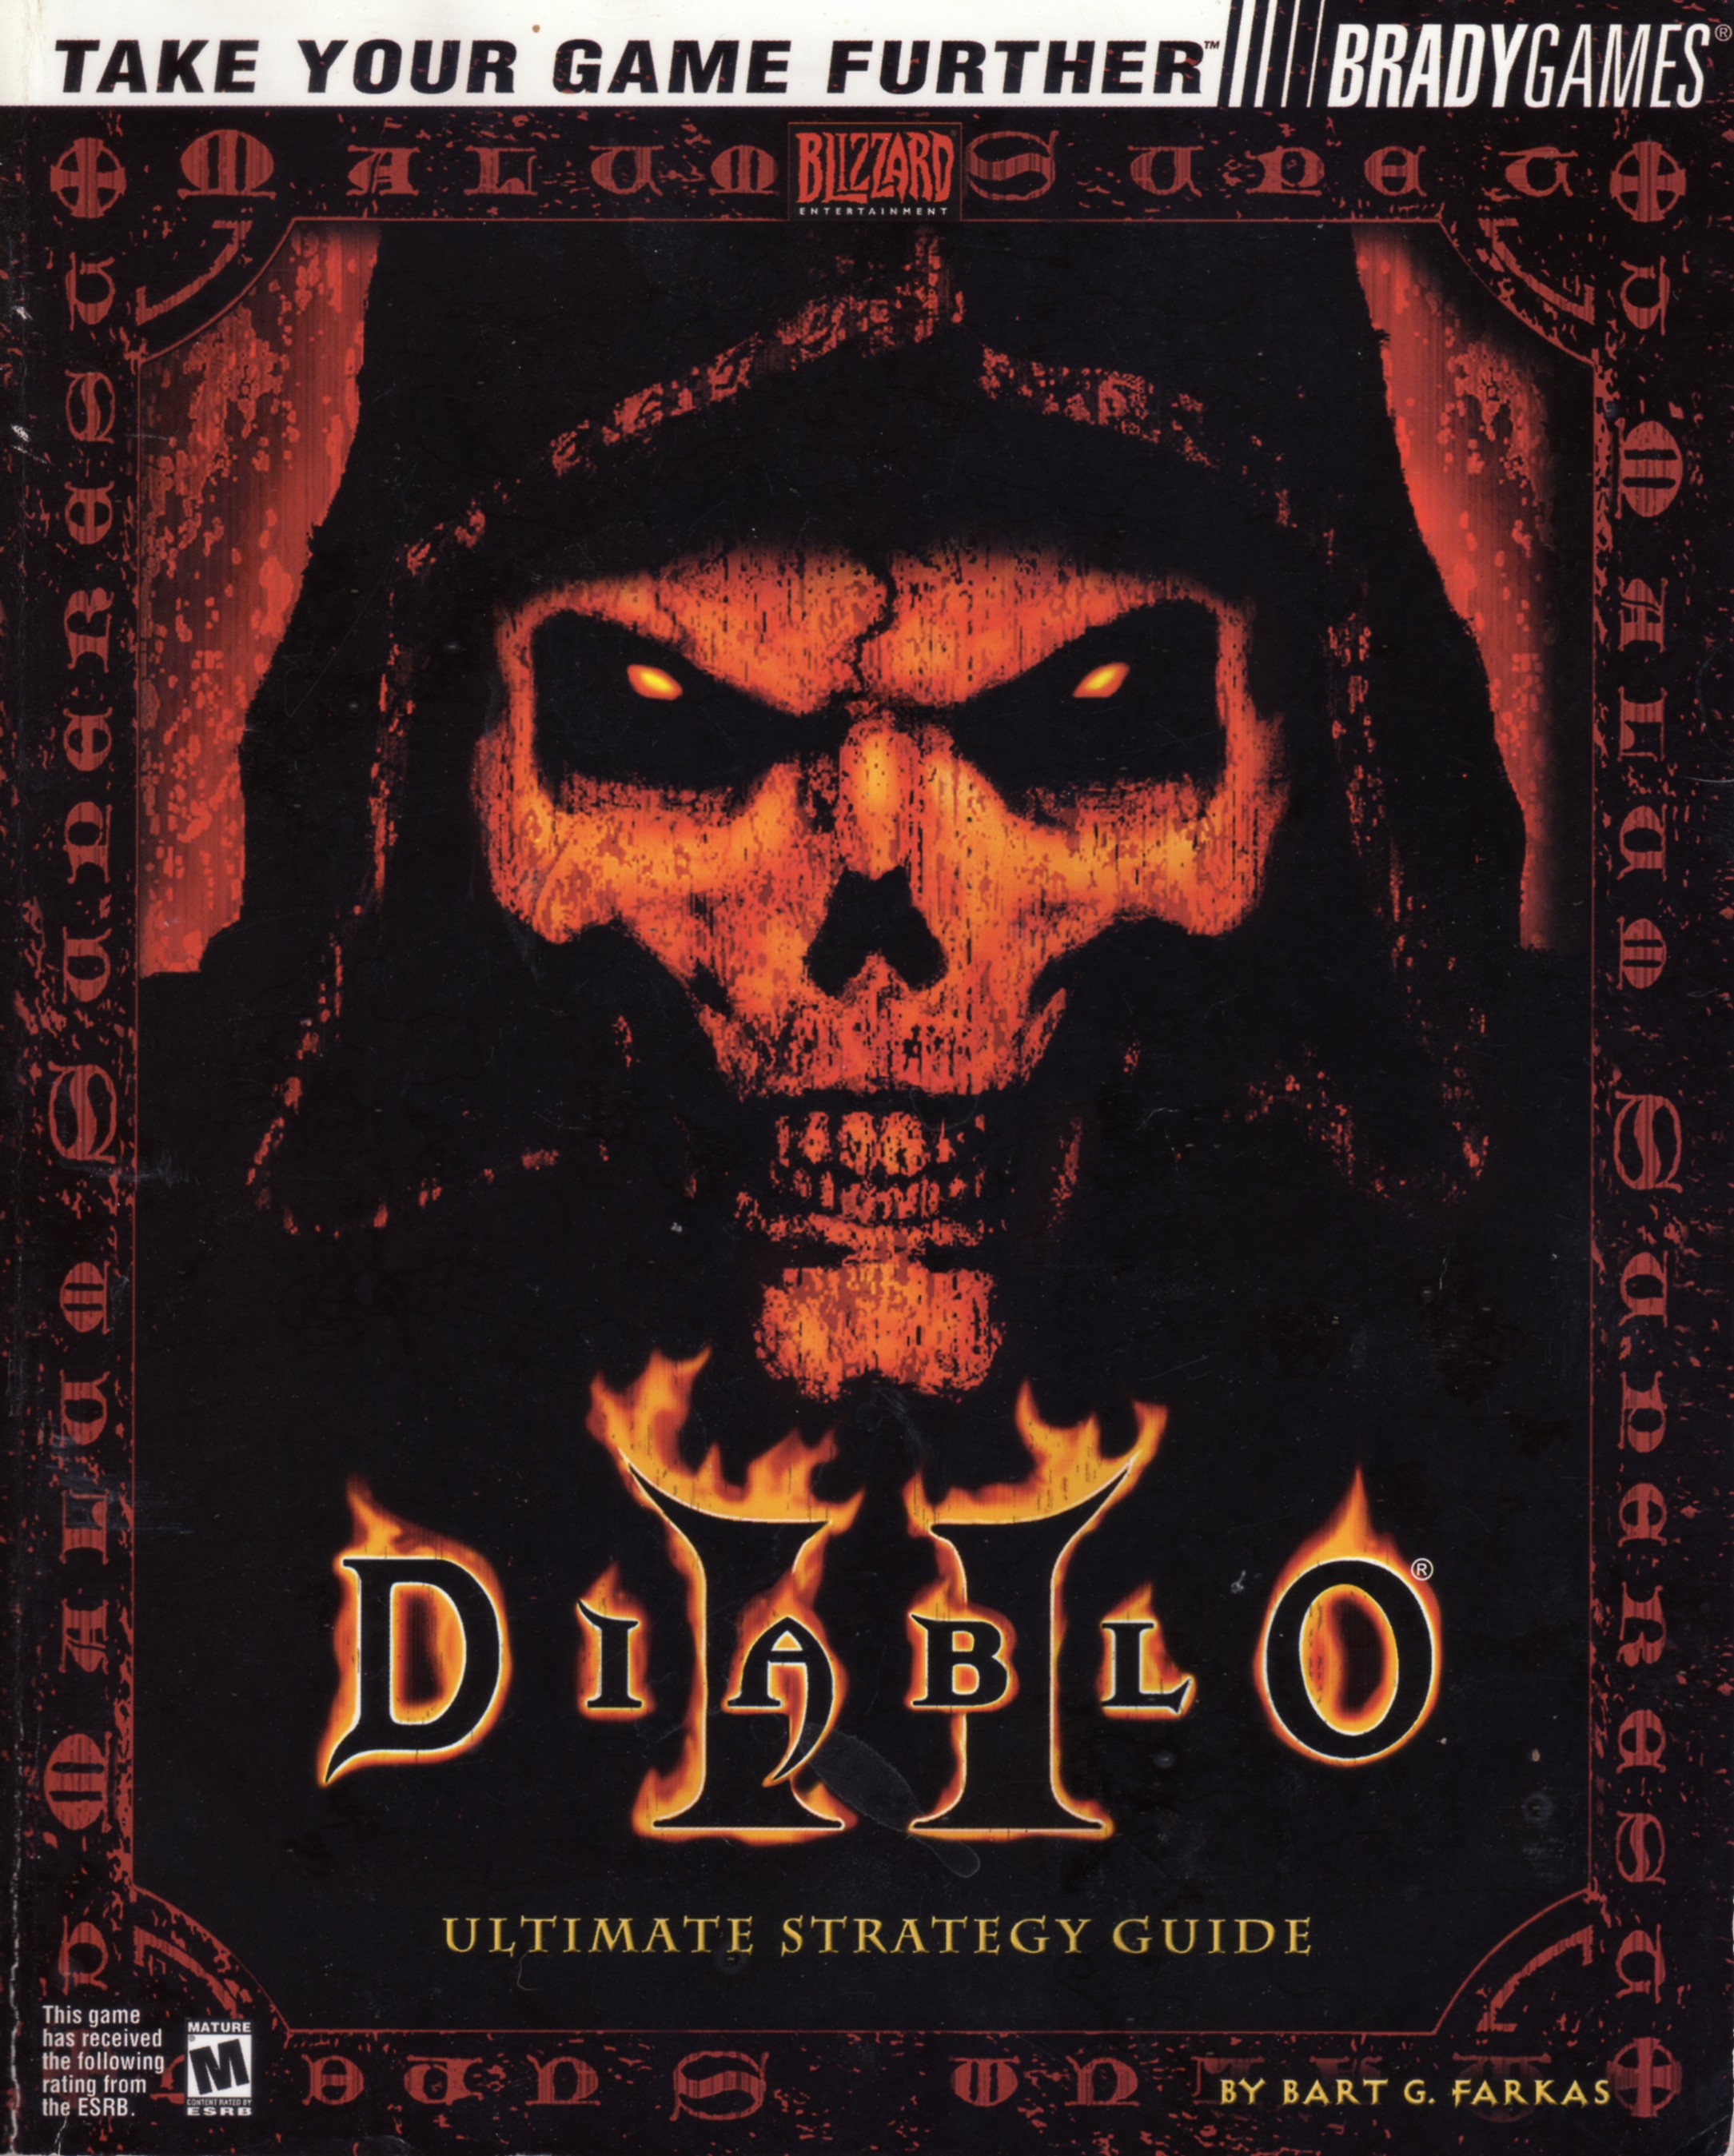 More information about "Diablo II Ultimate Strategy Guide"